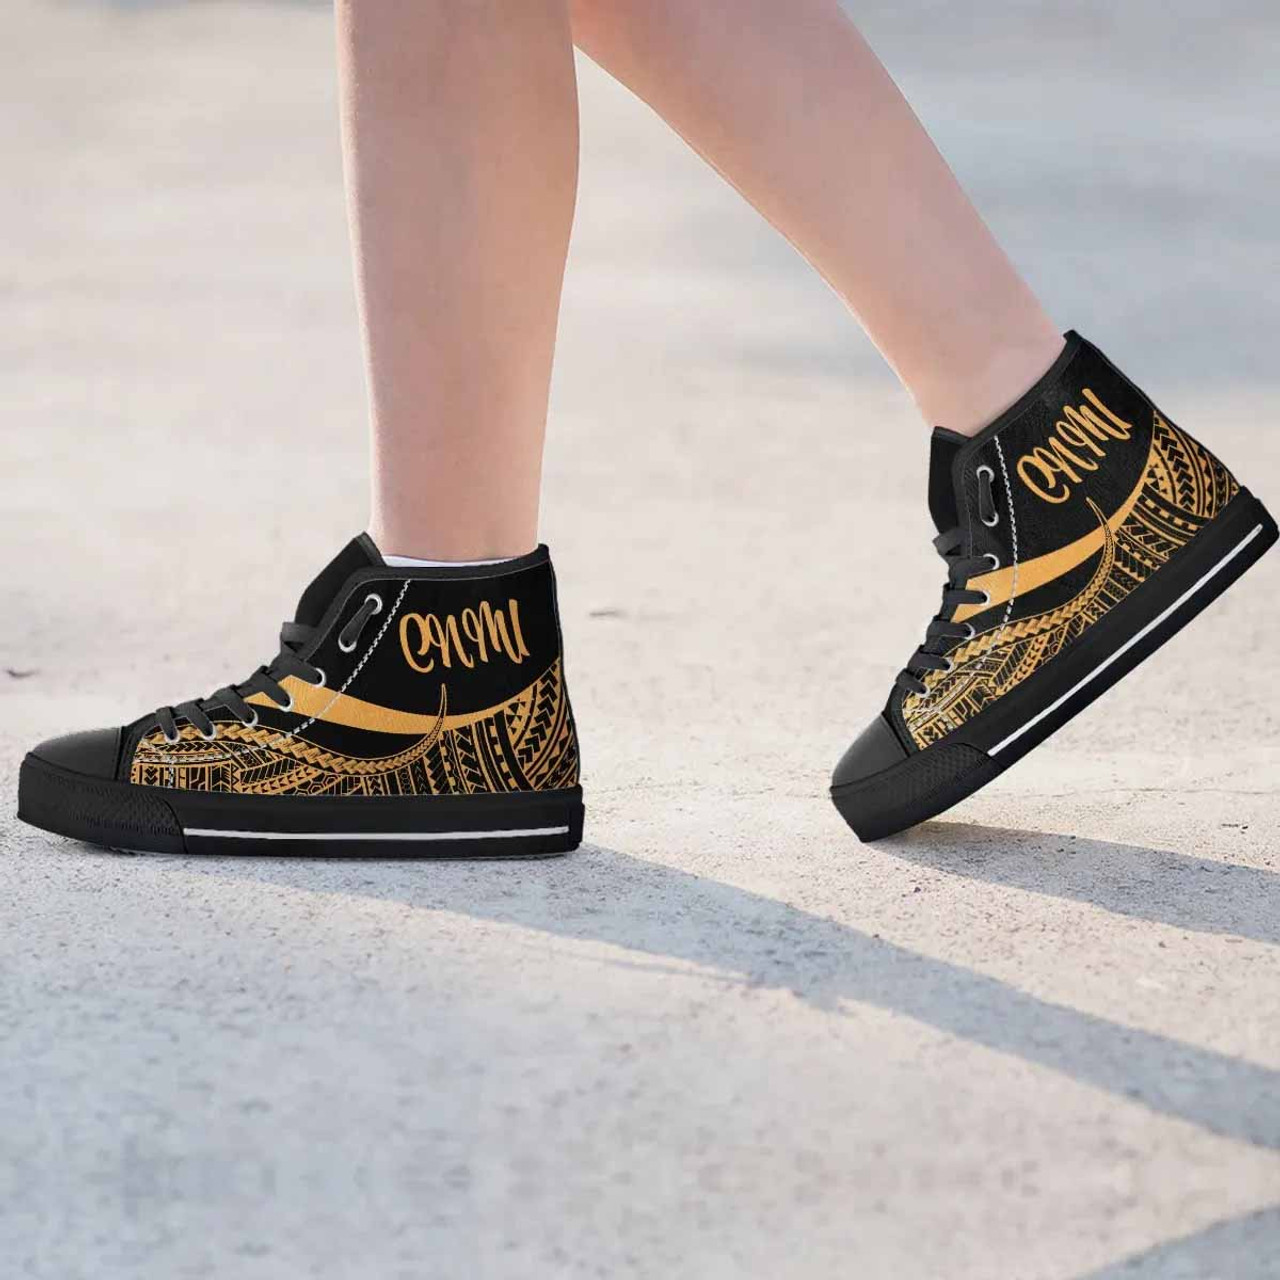 Northern Mariana Islands High Top Shoes Gold - Polynesian Tentacle Tribal Pattern 2